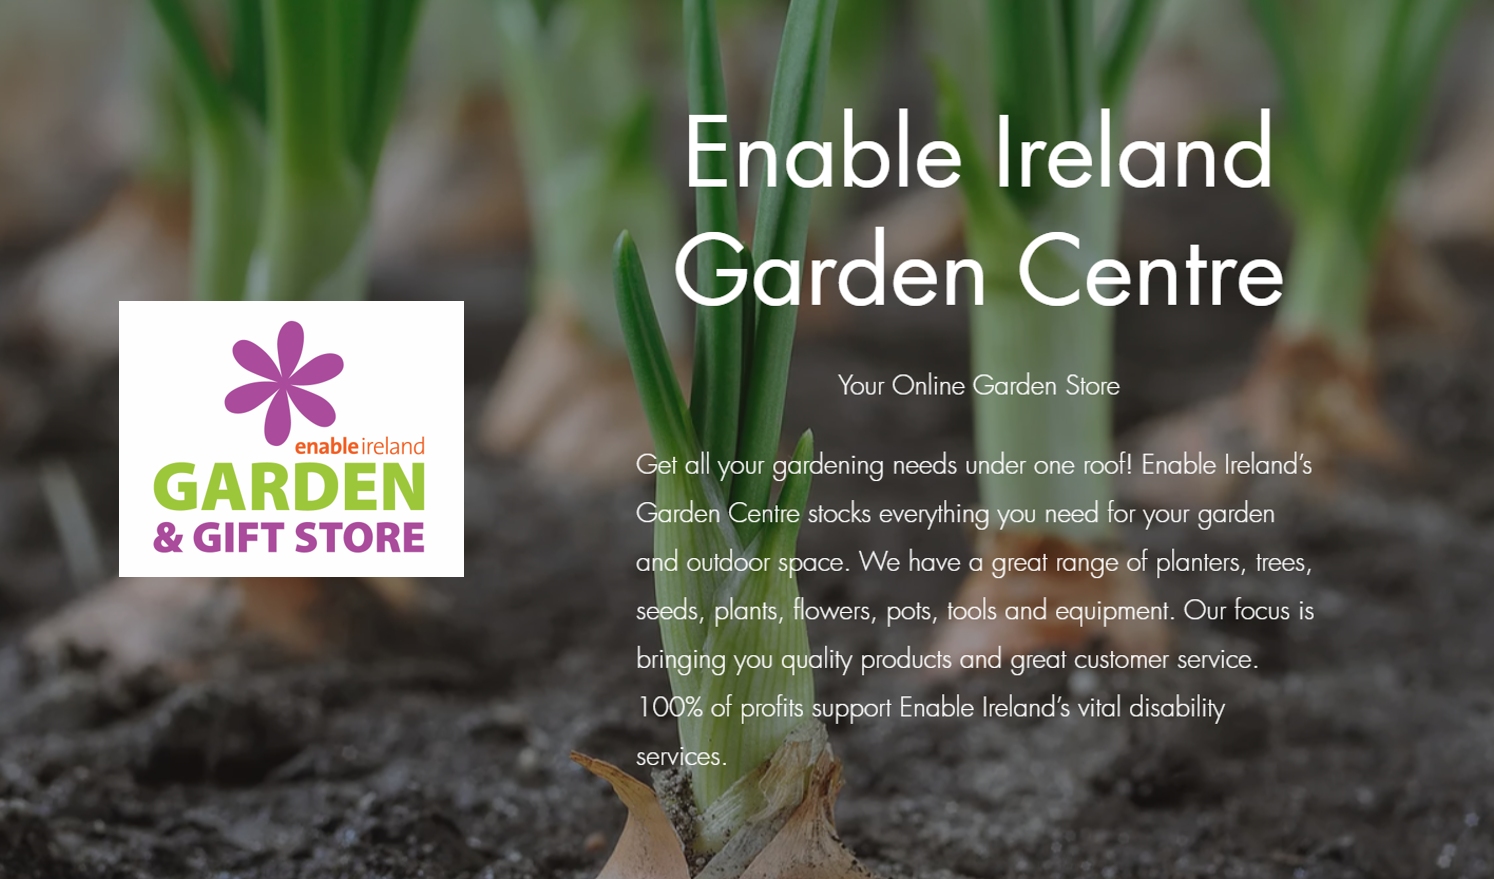 The image shows a picture of onions with text and logo from the Enable Ireland online garden centre 